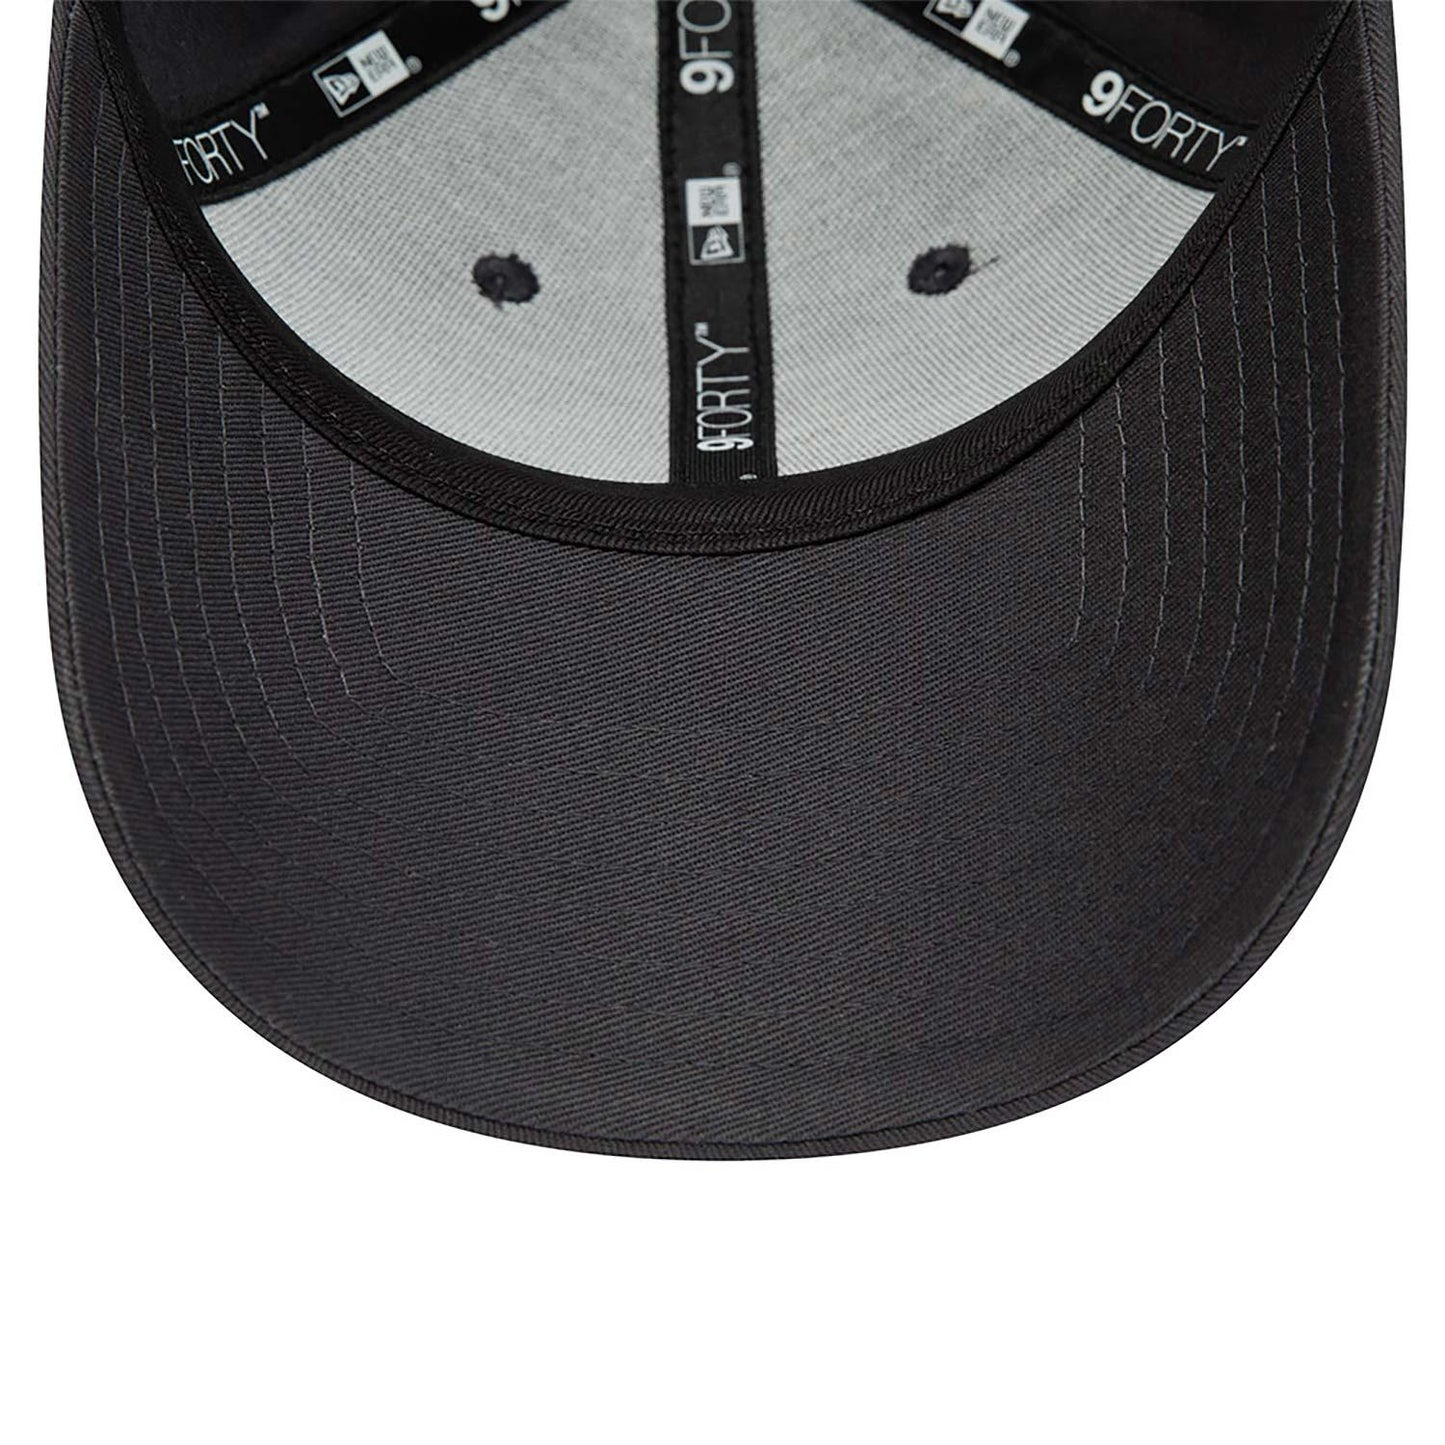 NEW ERA 9FORTY MLB INFILL CHICAGO WHITE SOX CAP